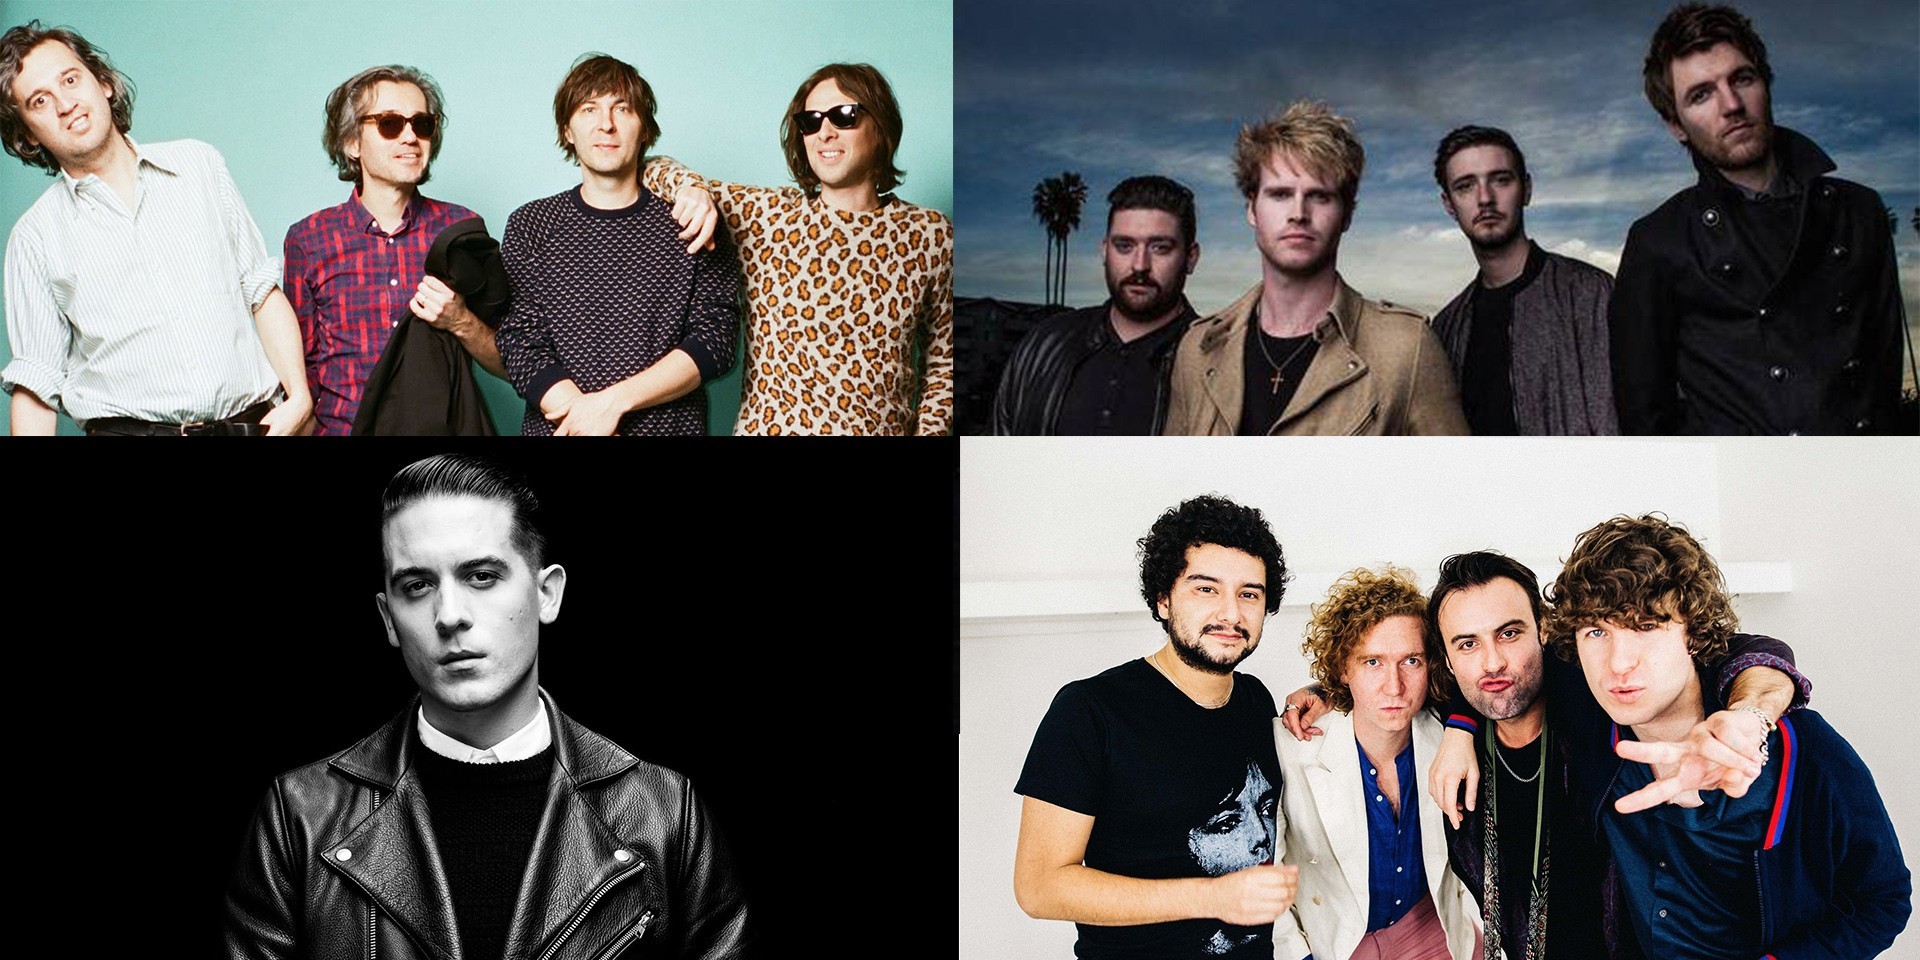 Good Vibes Festival 2017 is back with Phoenix, Kodaline, G-Eazy and The Kooks